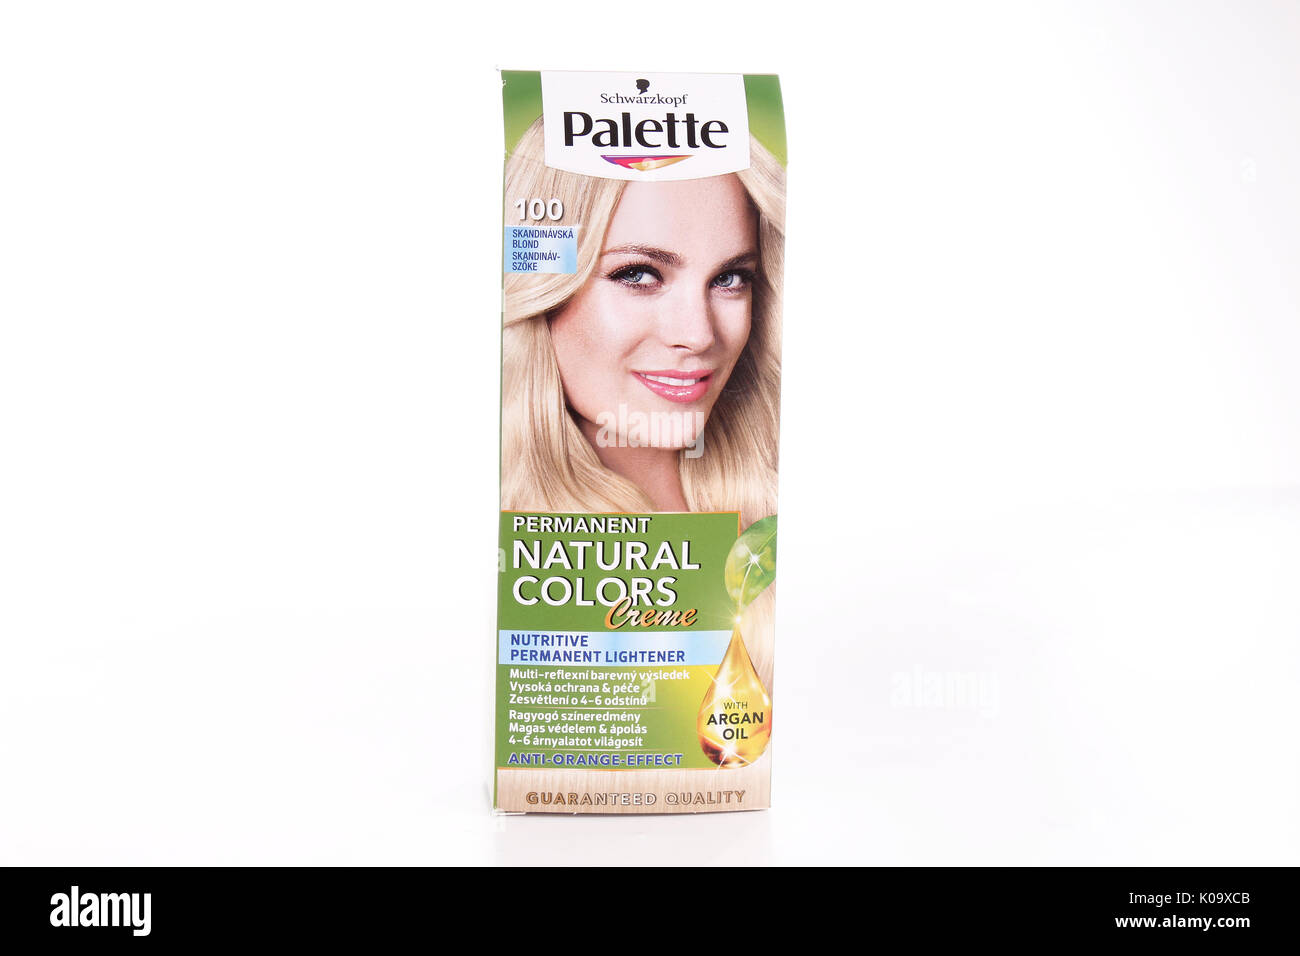 Palette permanent natural colors blond hair dye on isolated white studio background. Stock Photo